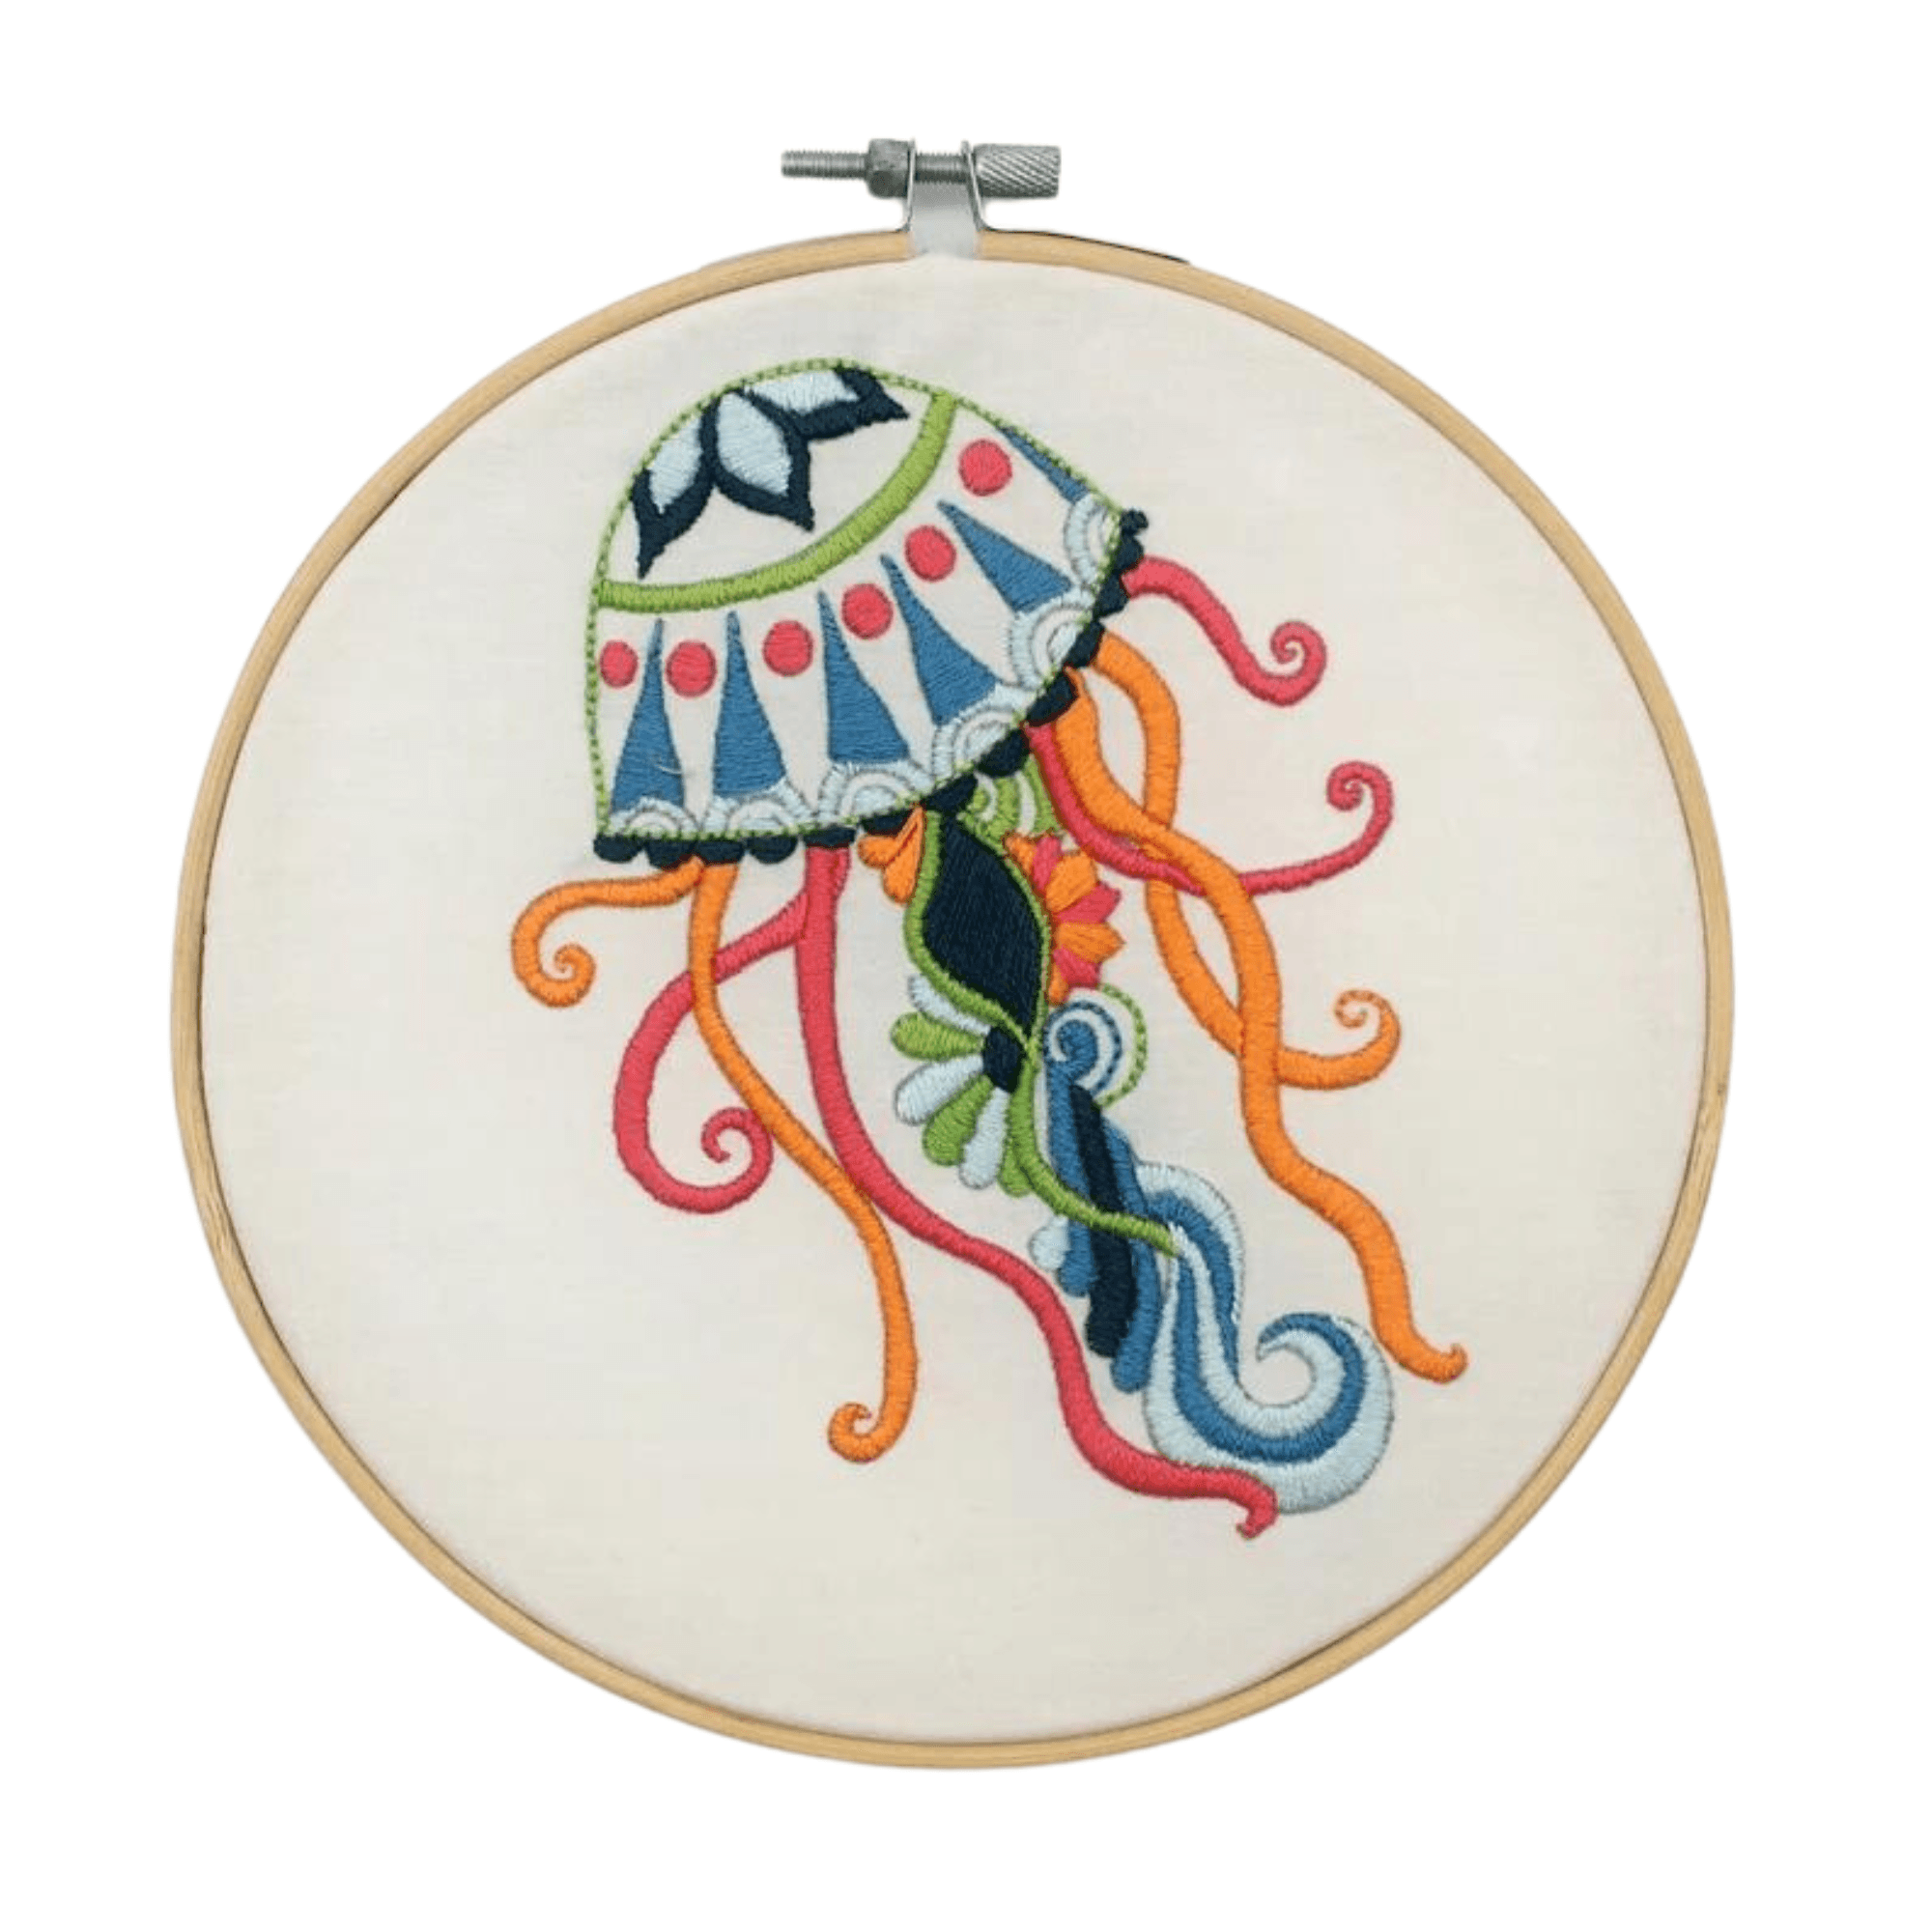 Jellyfish embroidery kit for beginners